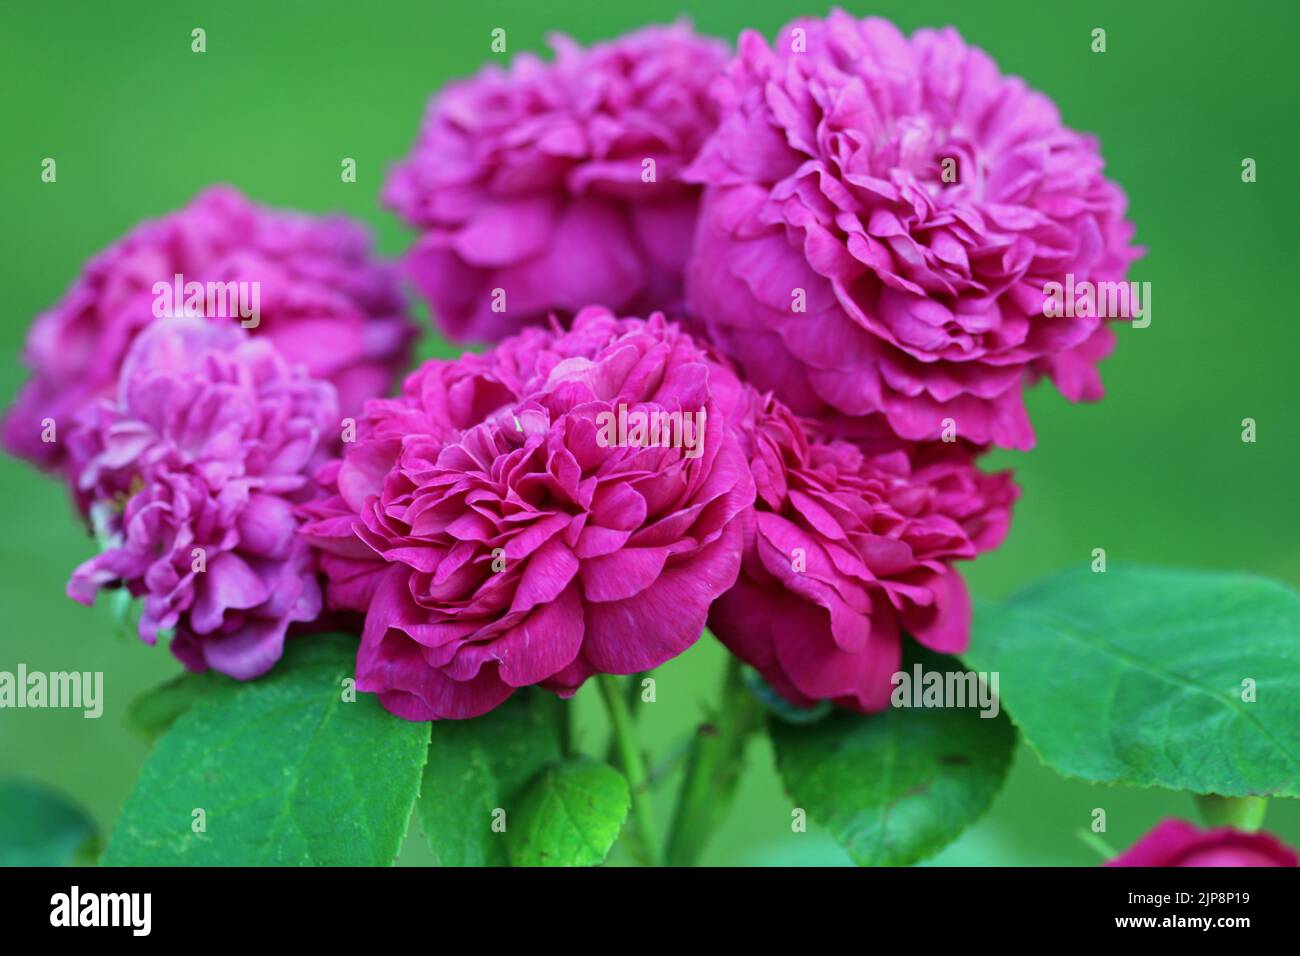 Pink old shrub rose, Rosa variety de Rescht, flowers in close up with a background of blurred leaves. Stock Photo